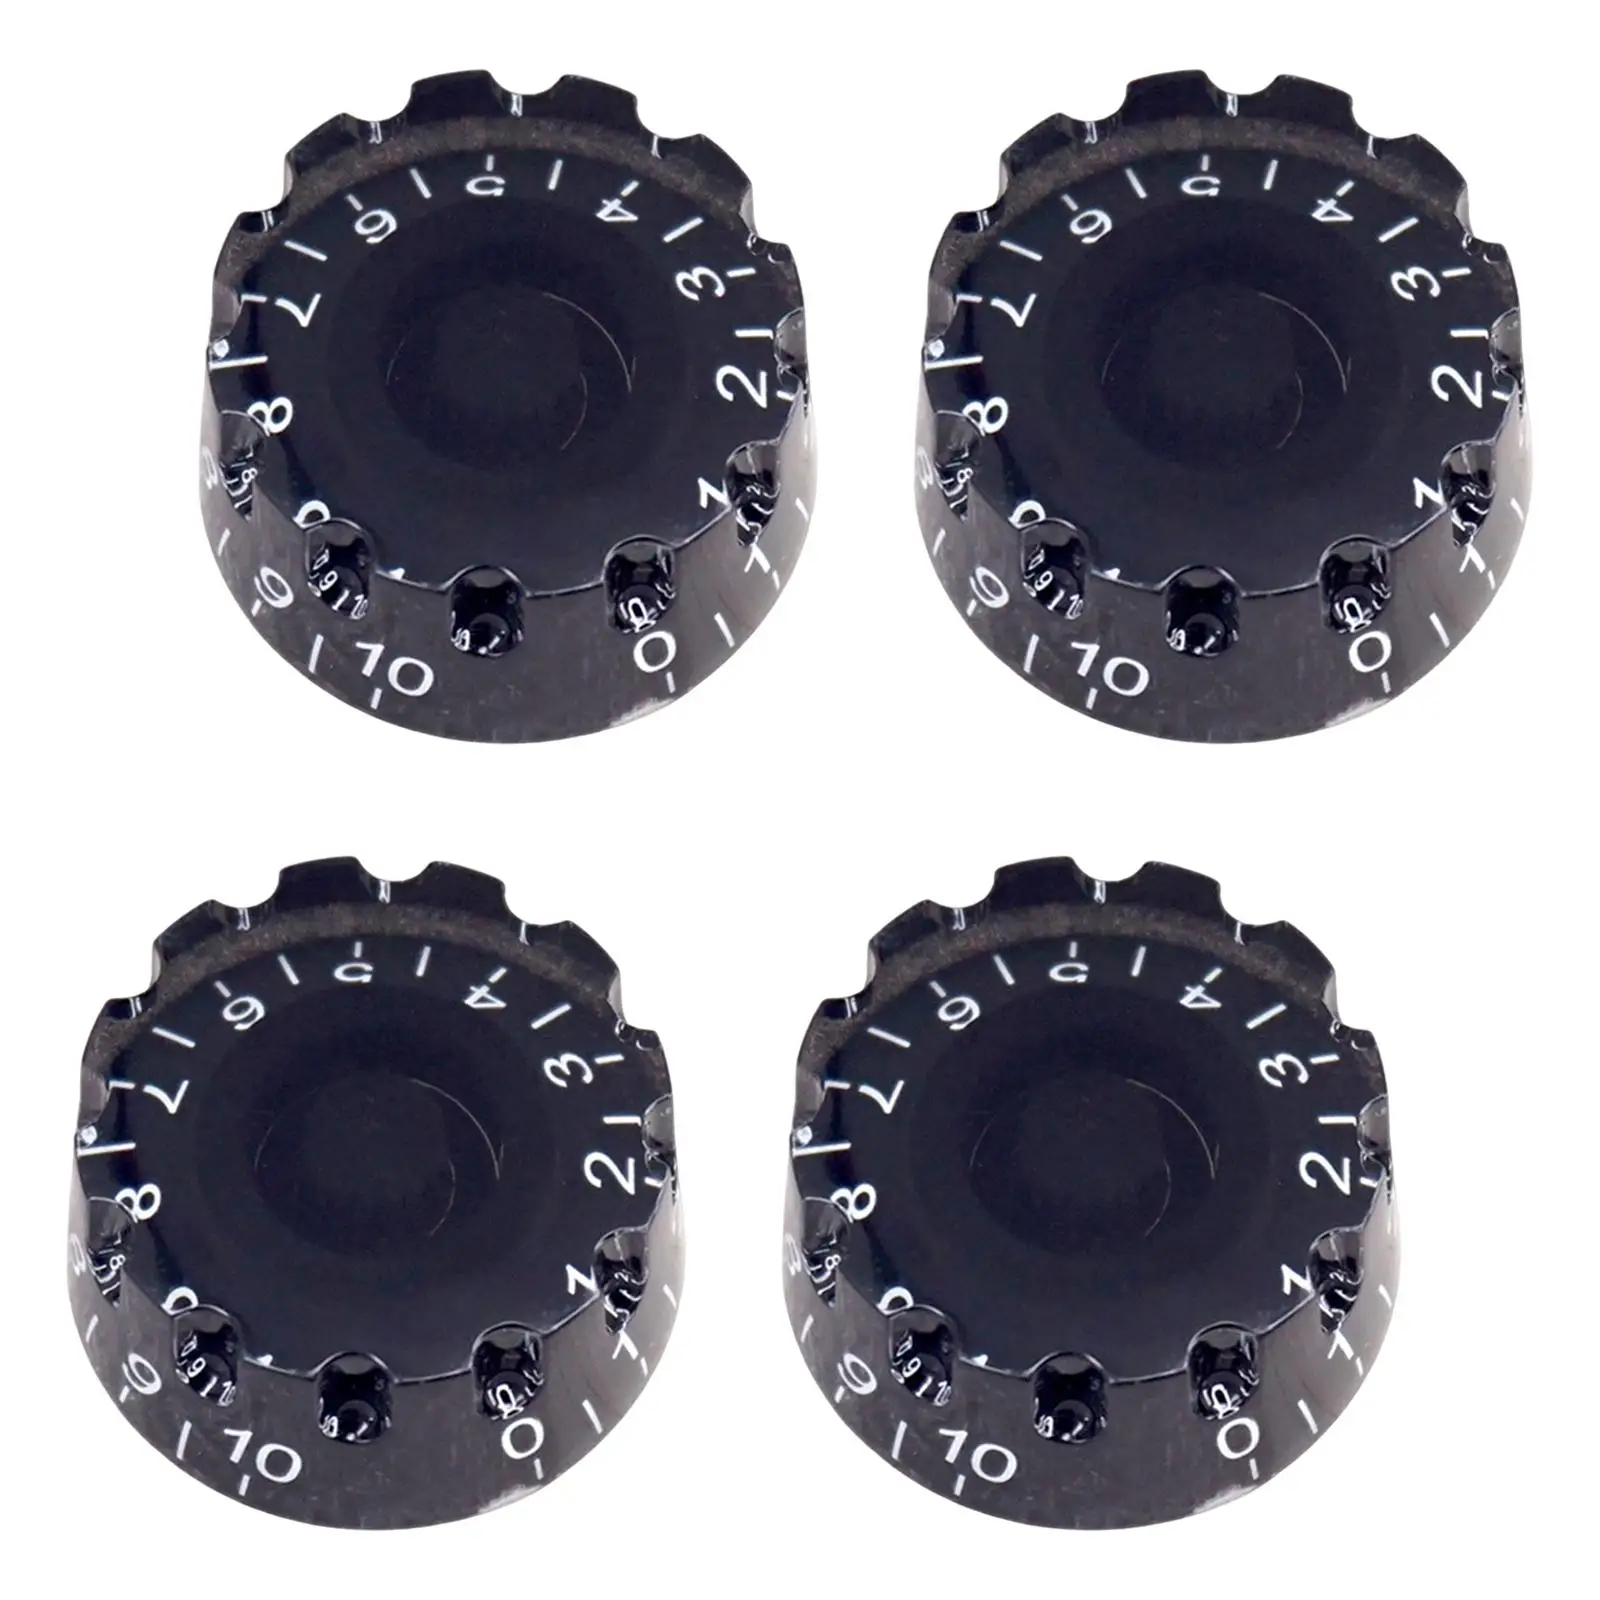 4 Pieces Guitar Knobs Bass Speed Control Knobs Electric Guitar Accessories for Daily Use Electric Guitar